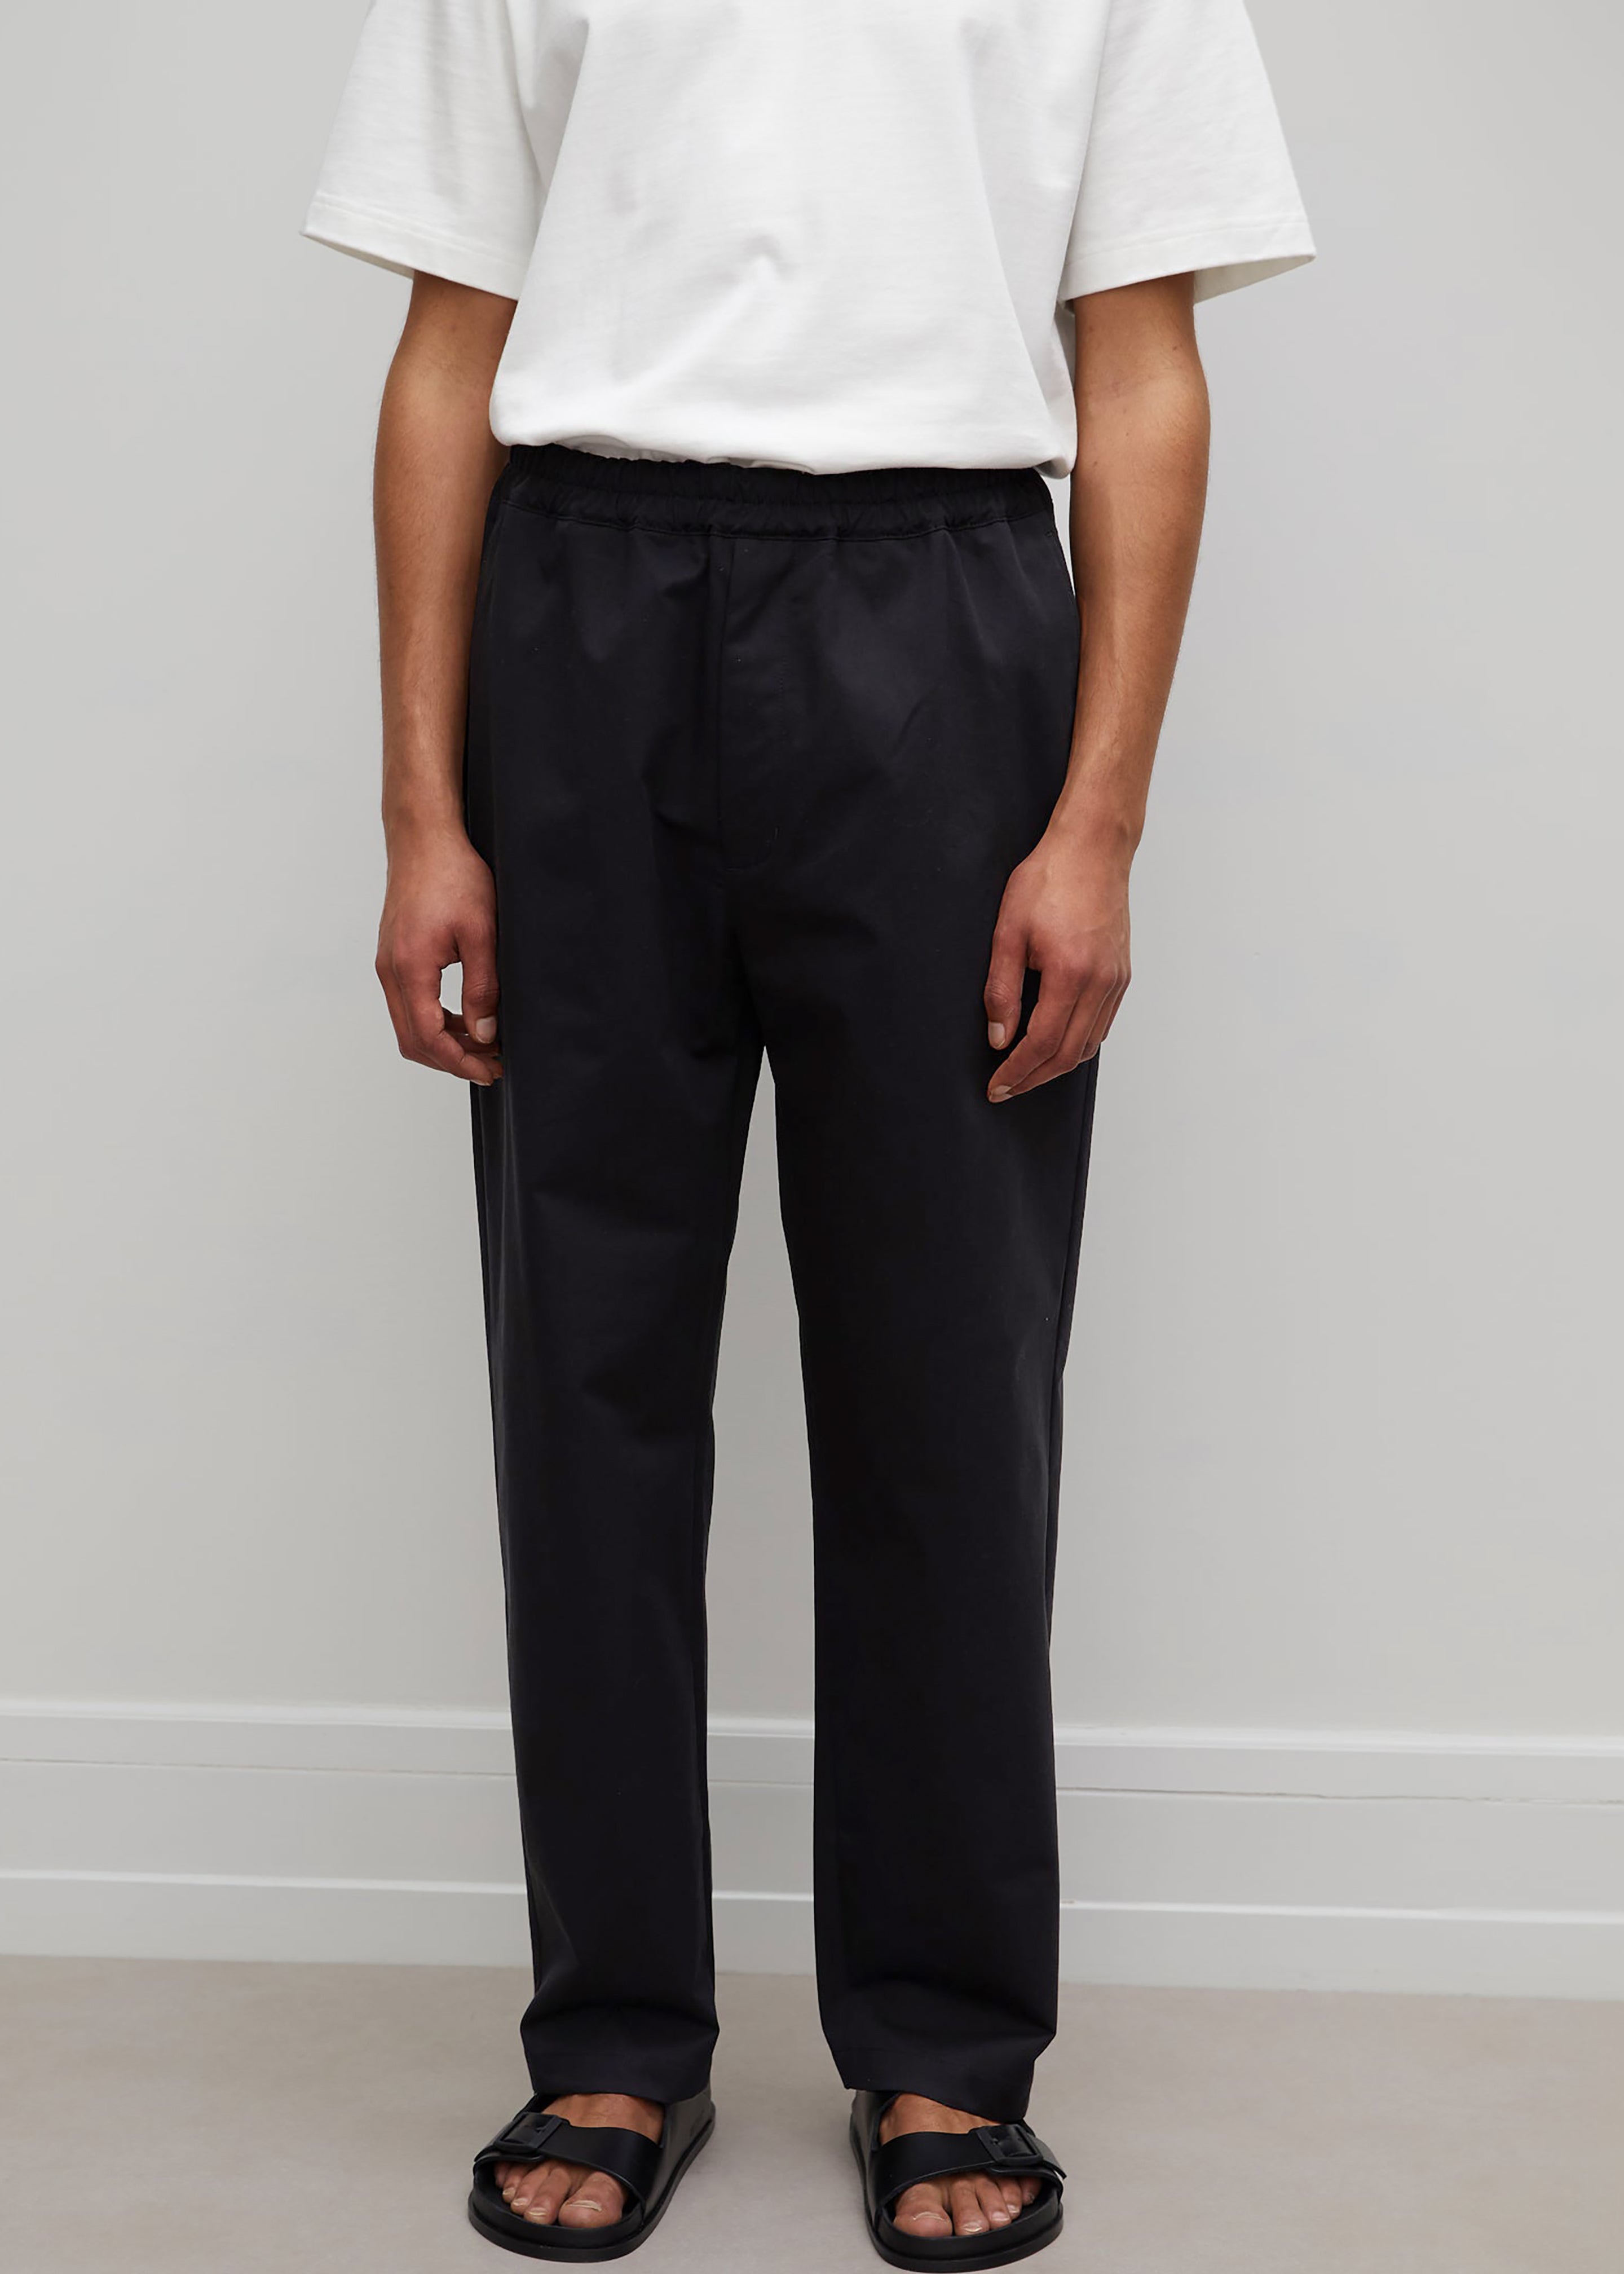 Róhe James Relaxed Fit Trousers - Noir - 2